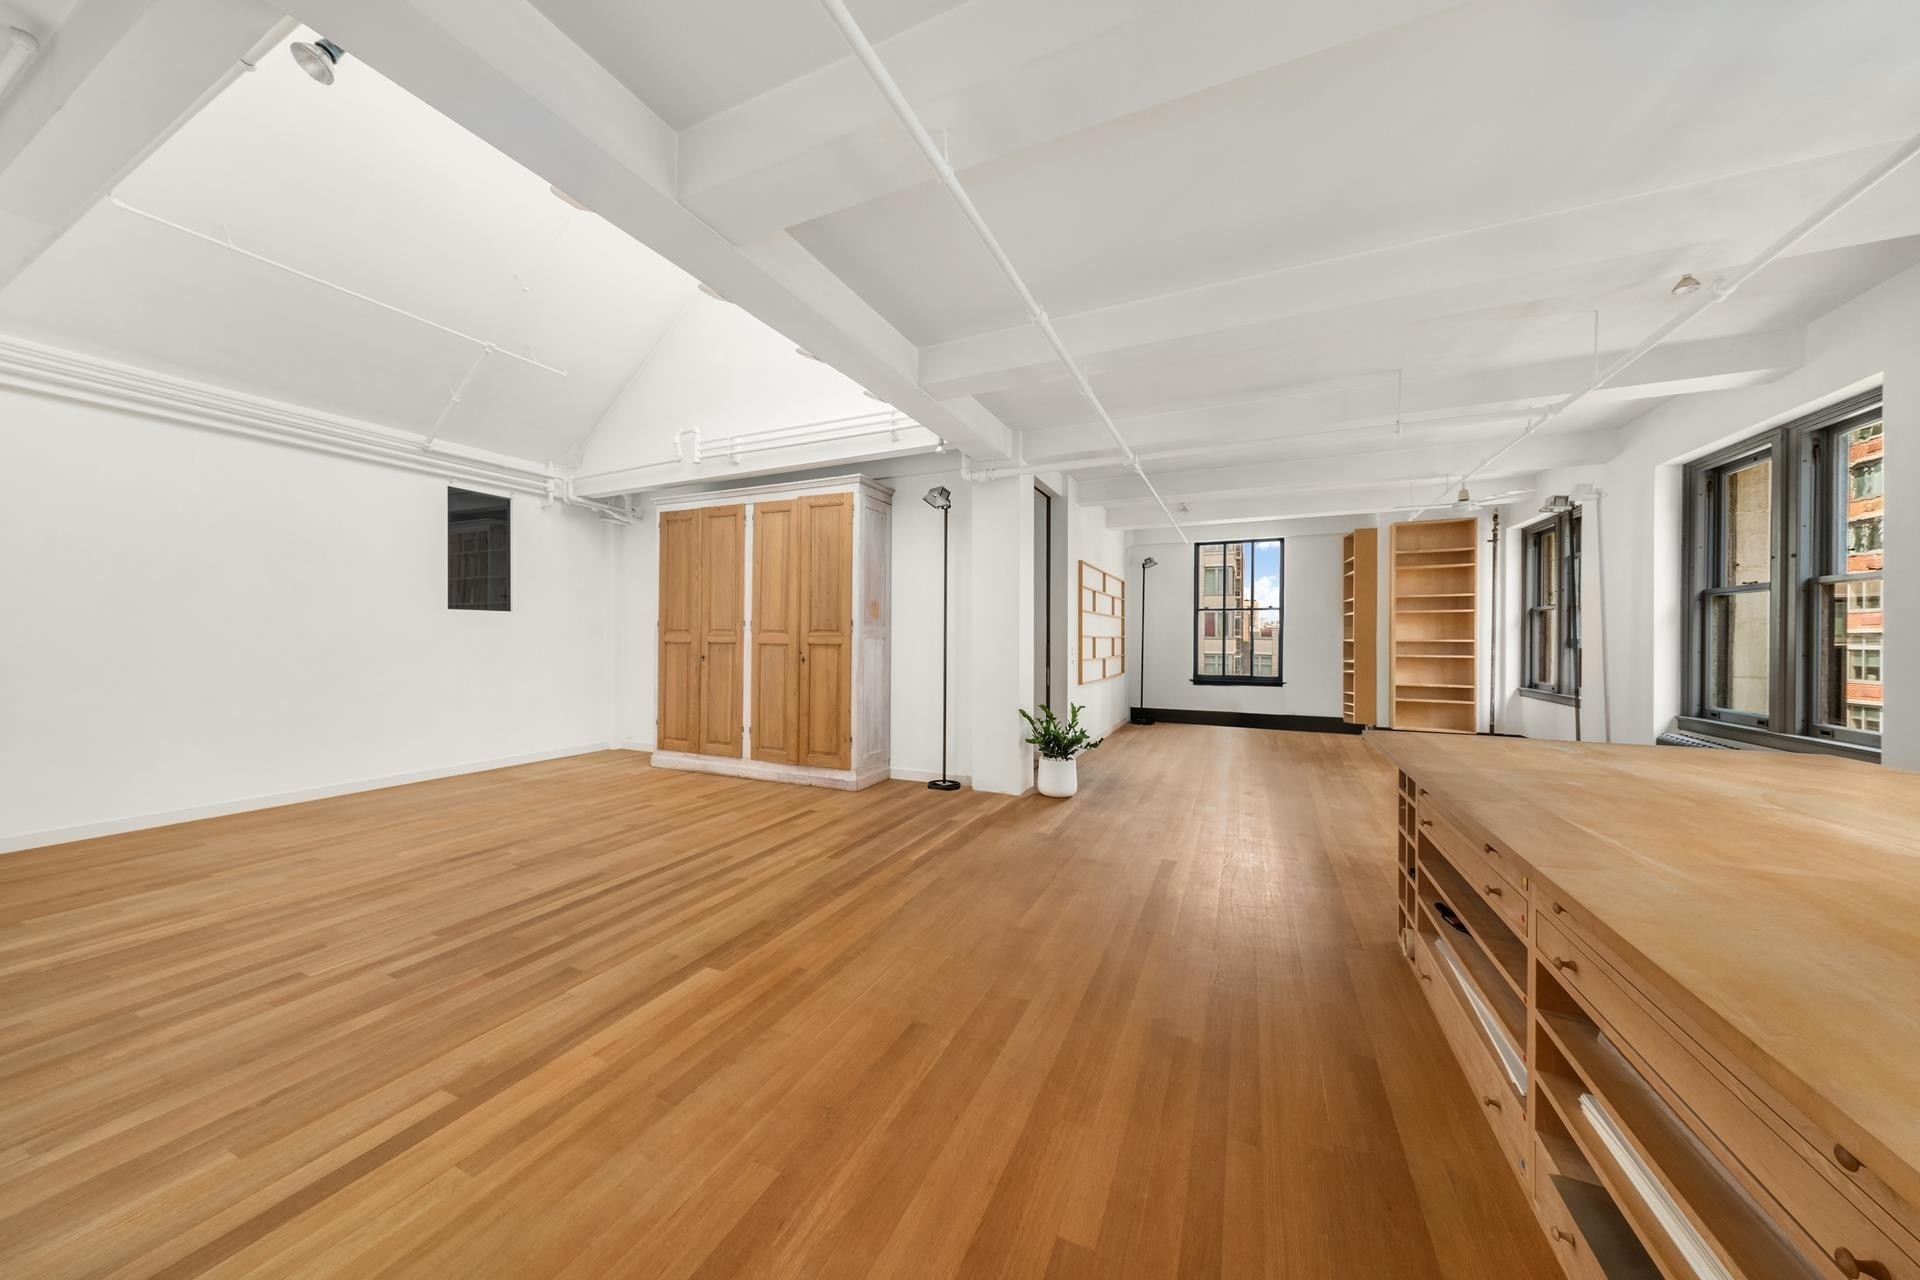 7. Co-op Properties for Sale at 12 Lofts, 38 W 26TH ST, PH12 Flatiron District, New York, NY 10010